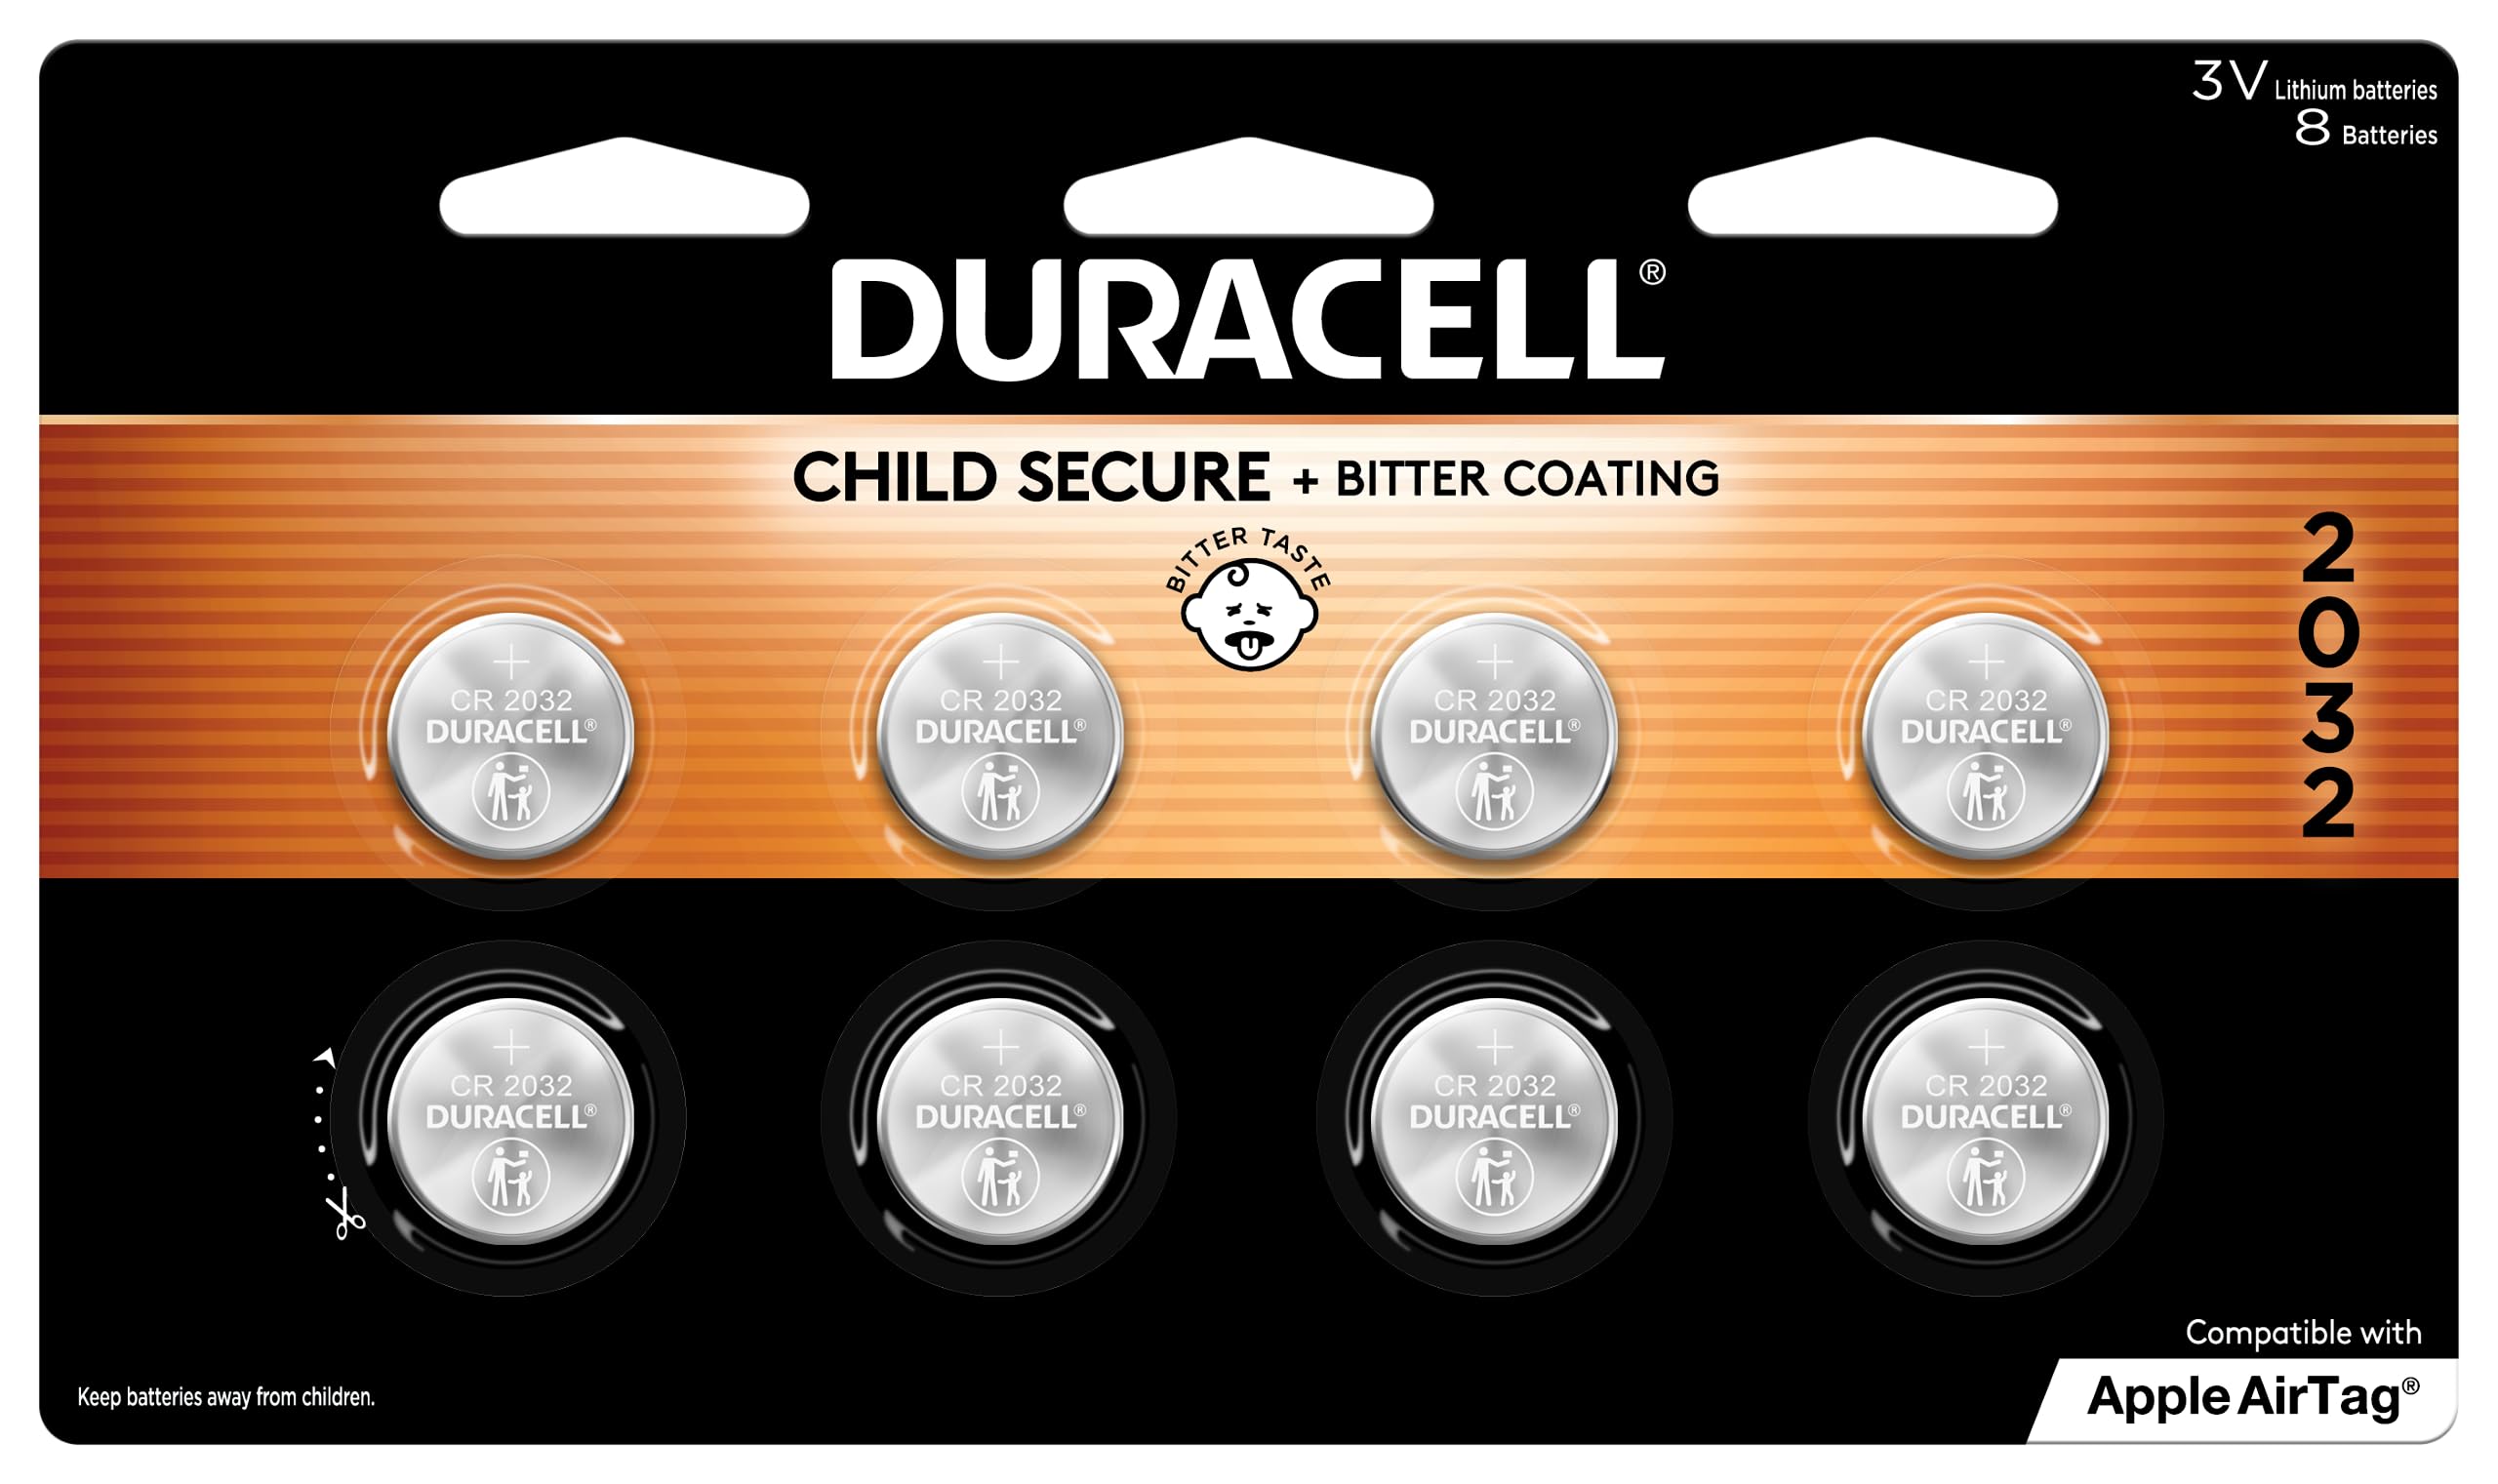 Amazon Duracell 2032 Lithium Battery. 8 Count Pack. $9.13 (List price $23.59)